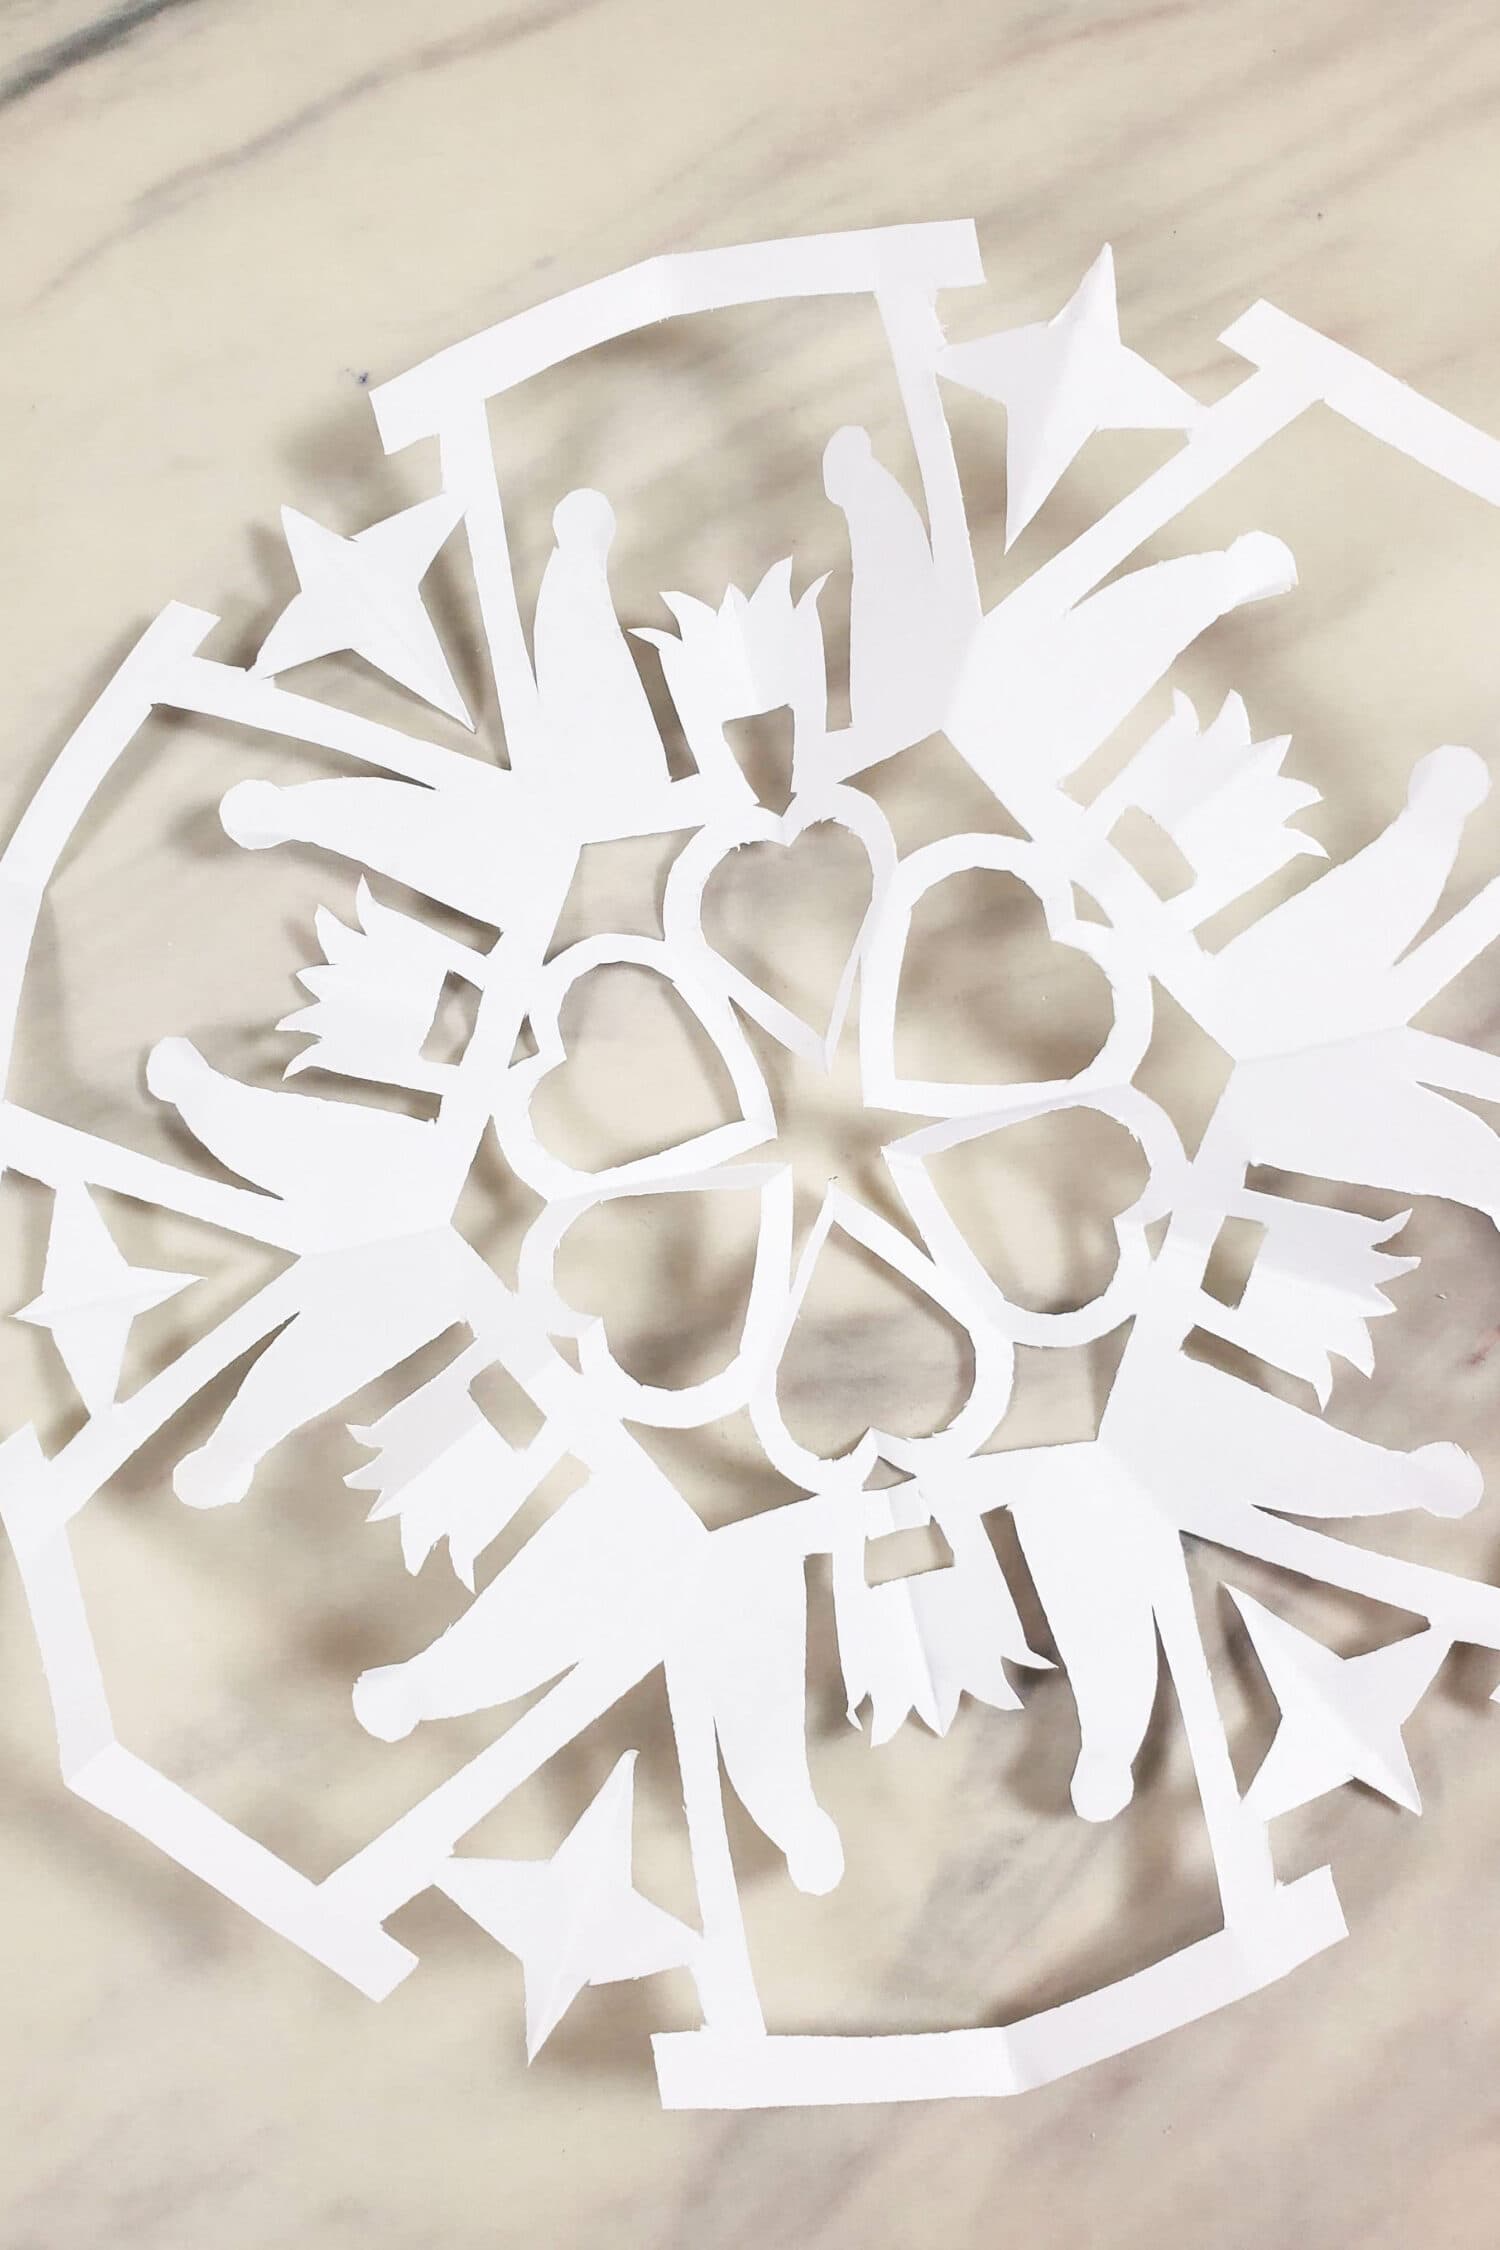 Snag ALL 32 original Primary Song Snowflakes created by OCD Primary Chorister (2013 to 2017). These files are no longer publicly available on the original source website. They have been compiled, sourced, and edited to share once again rather then passing around partial copies in forums and groups. A fun singing time idea with printables for LDS Primary music leaders.